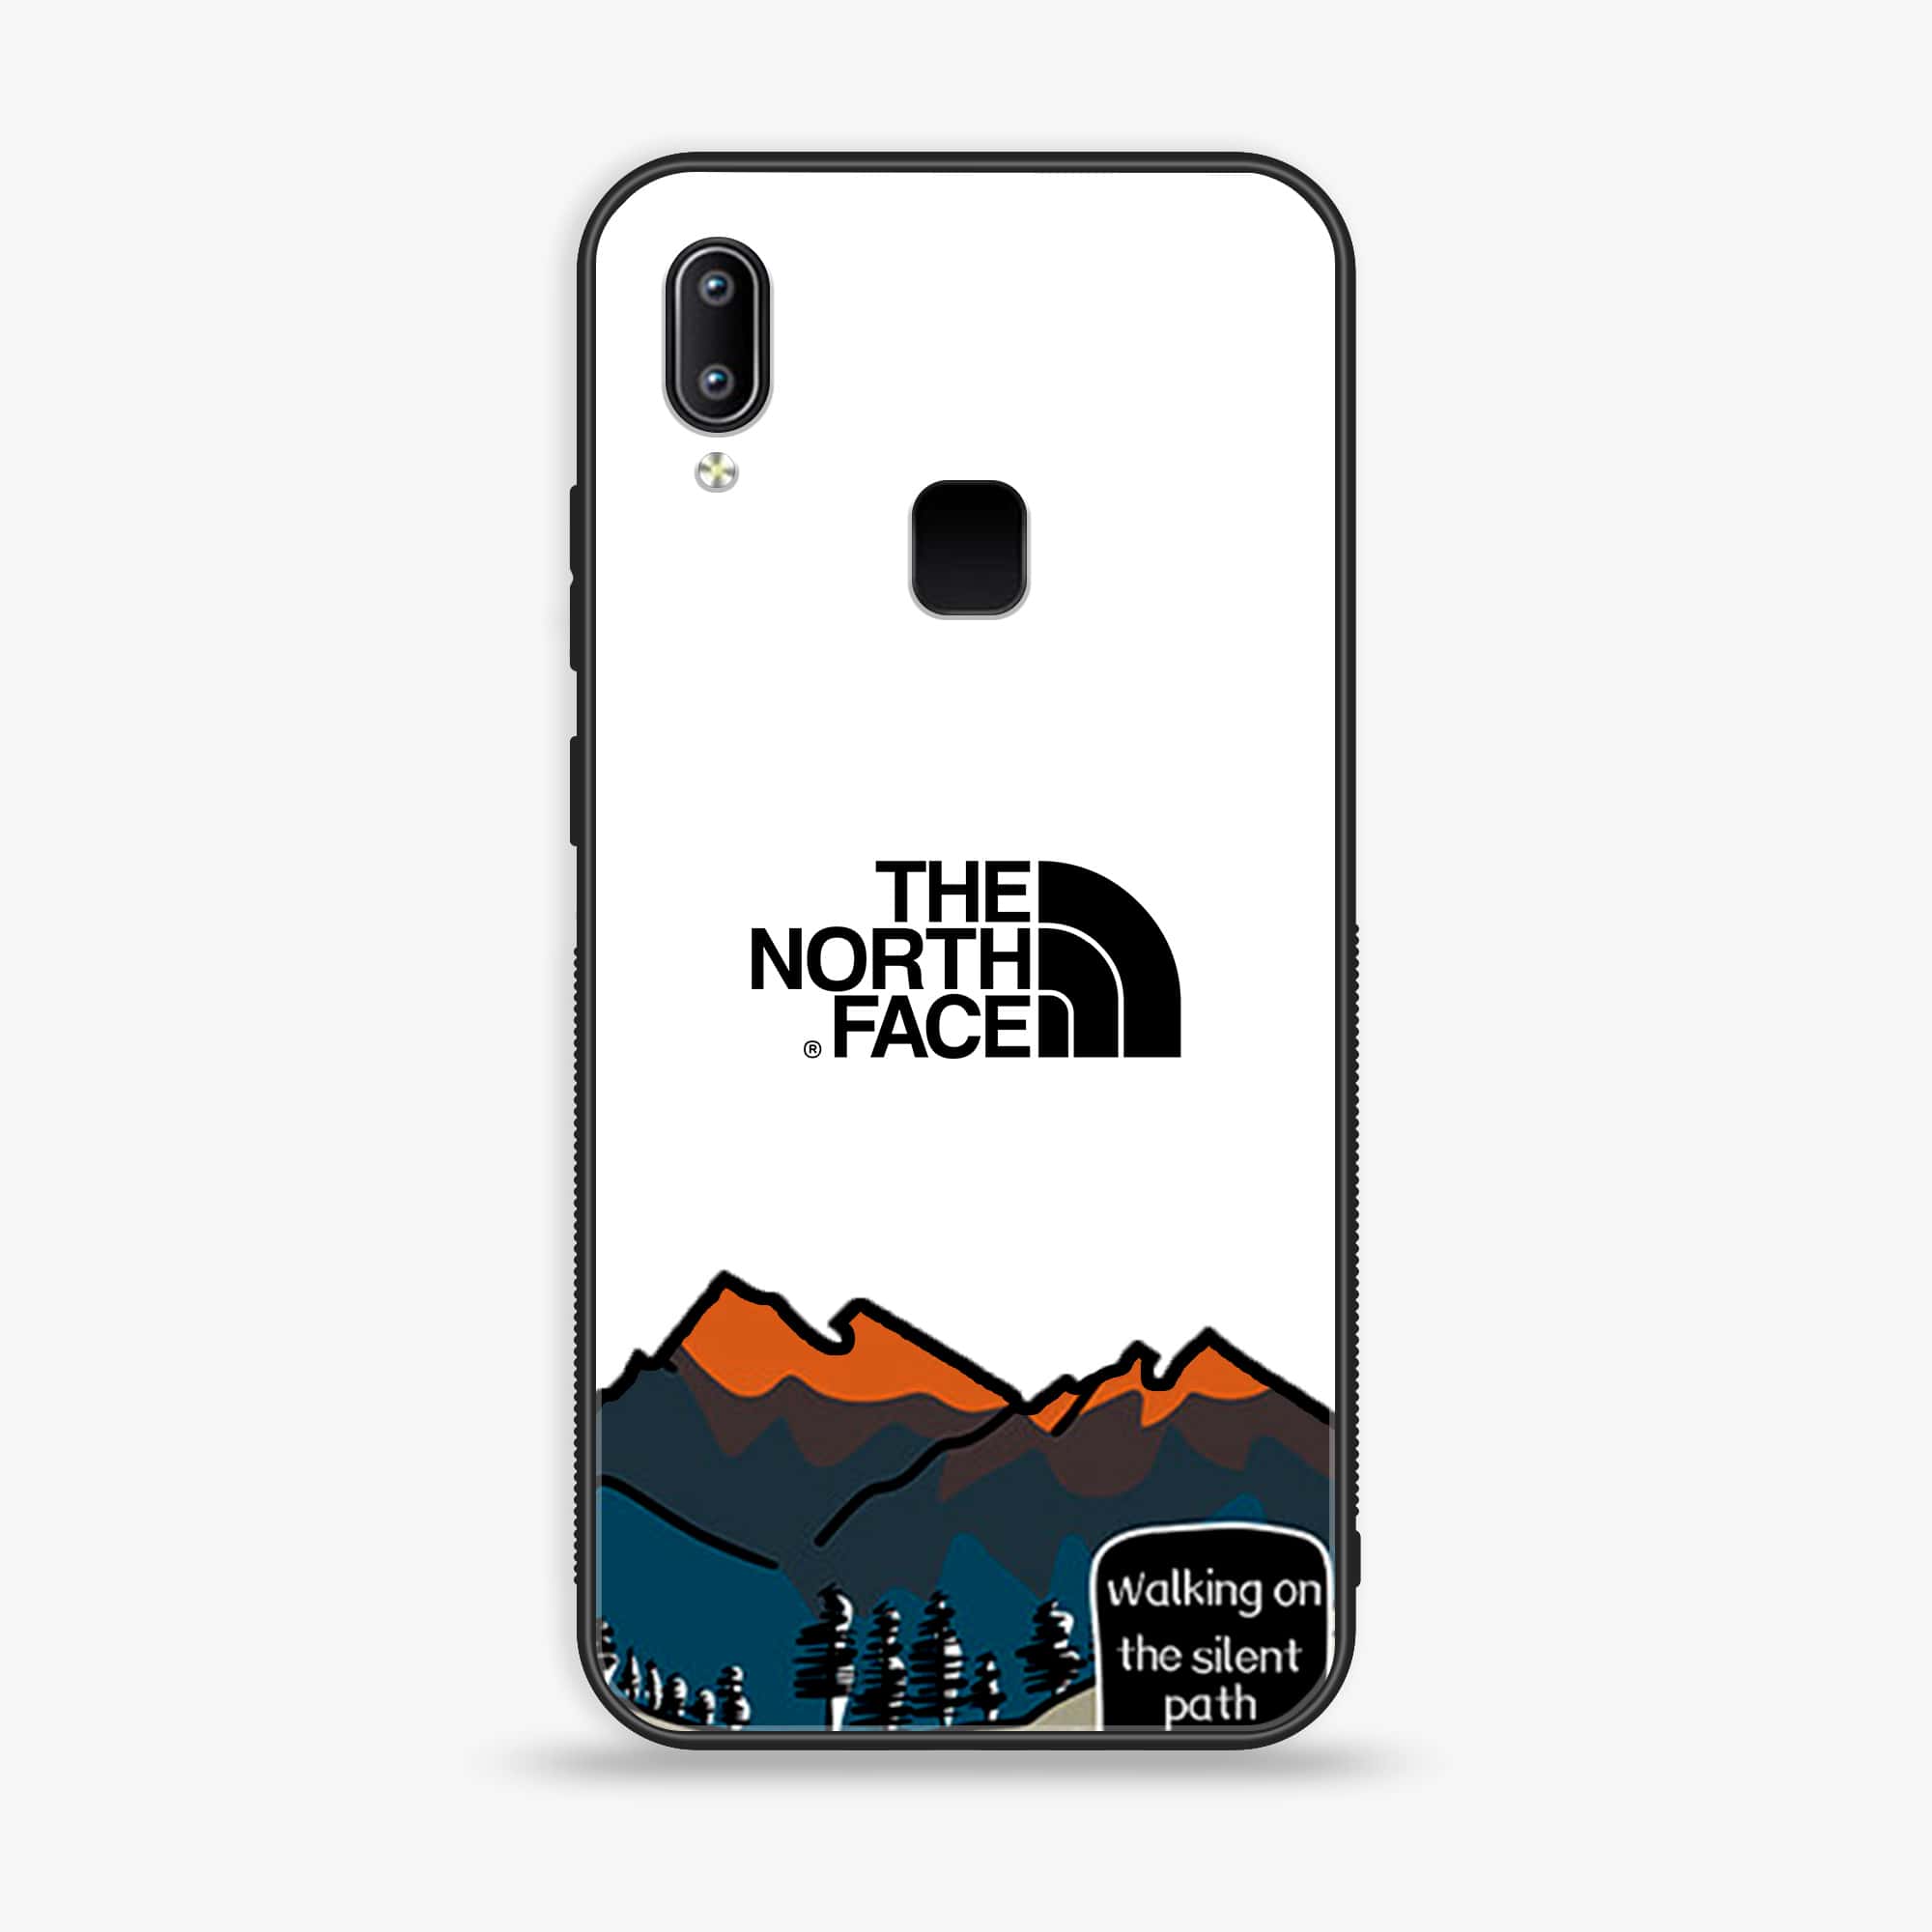 Vivo Y93 - The North Face Series - Premium Printed Glass soft Bumper shock Proof Case